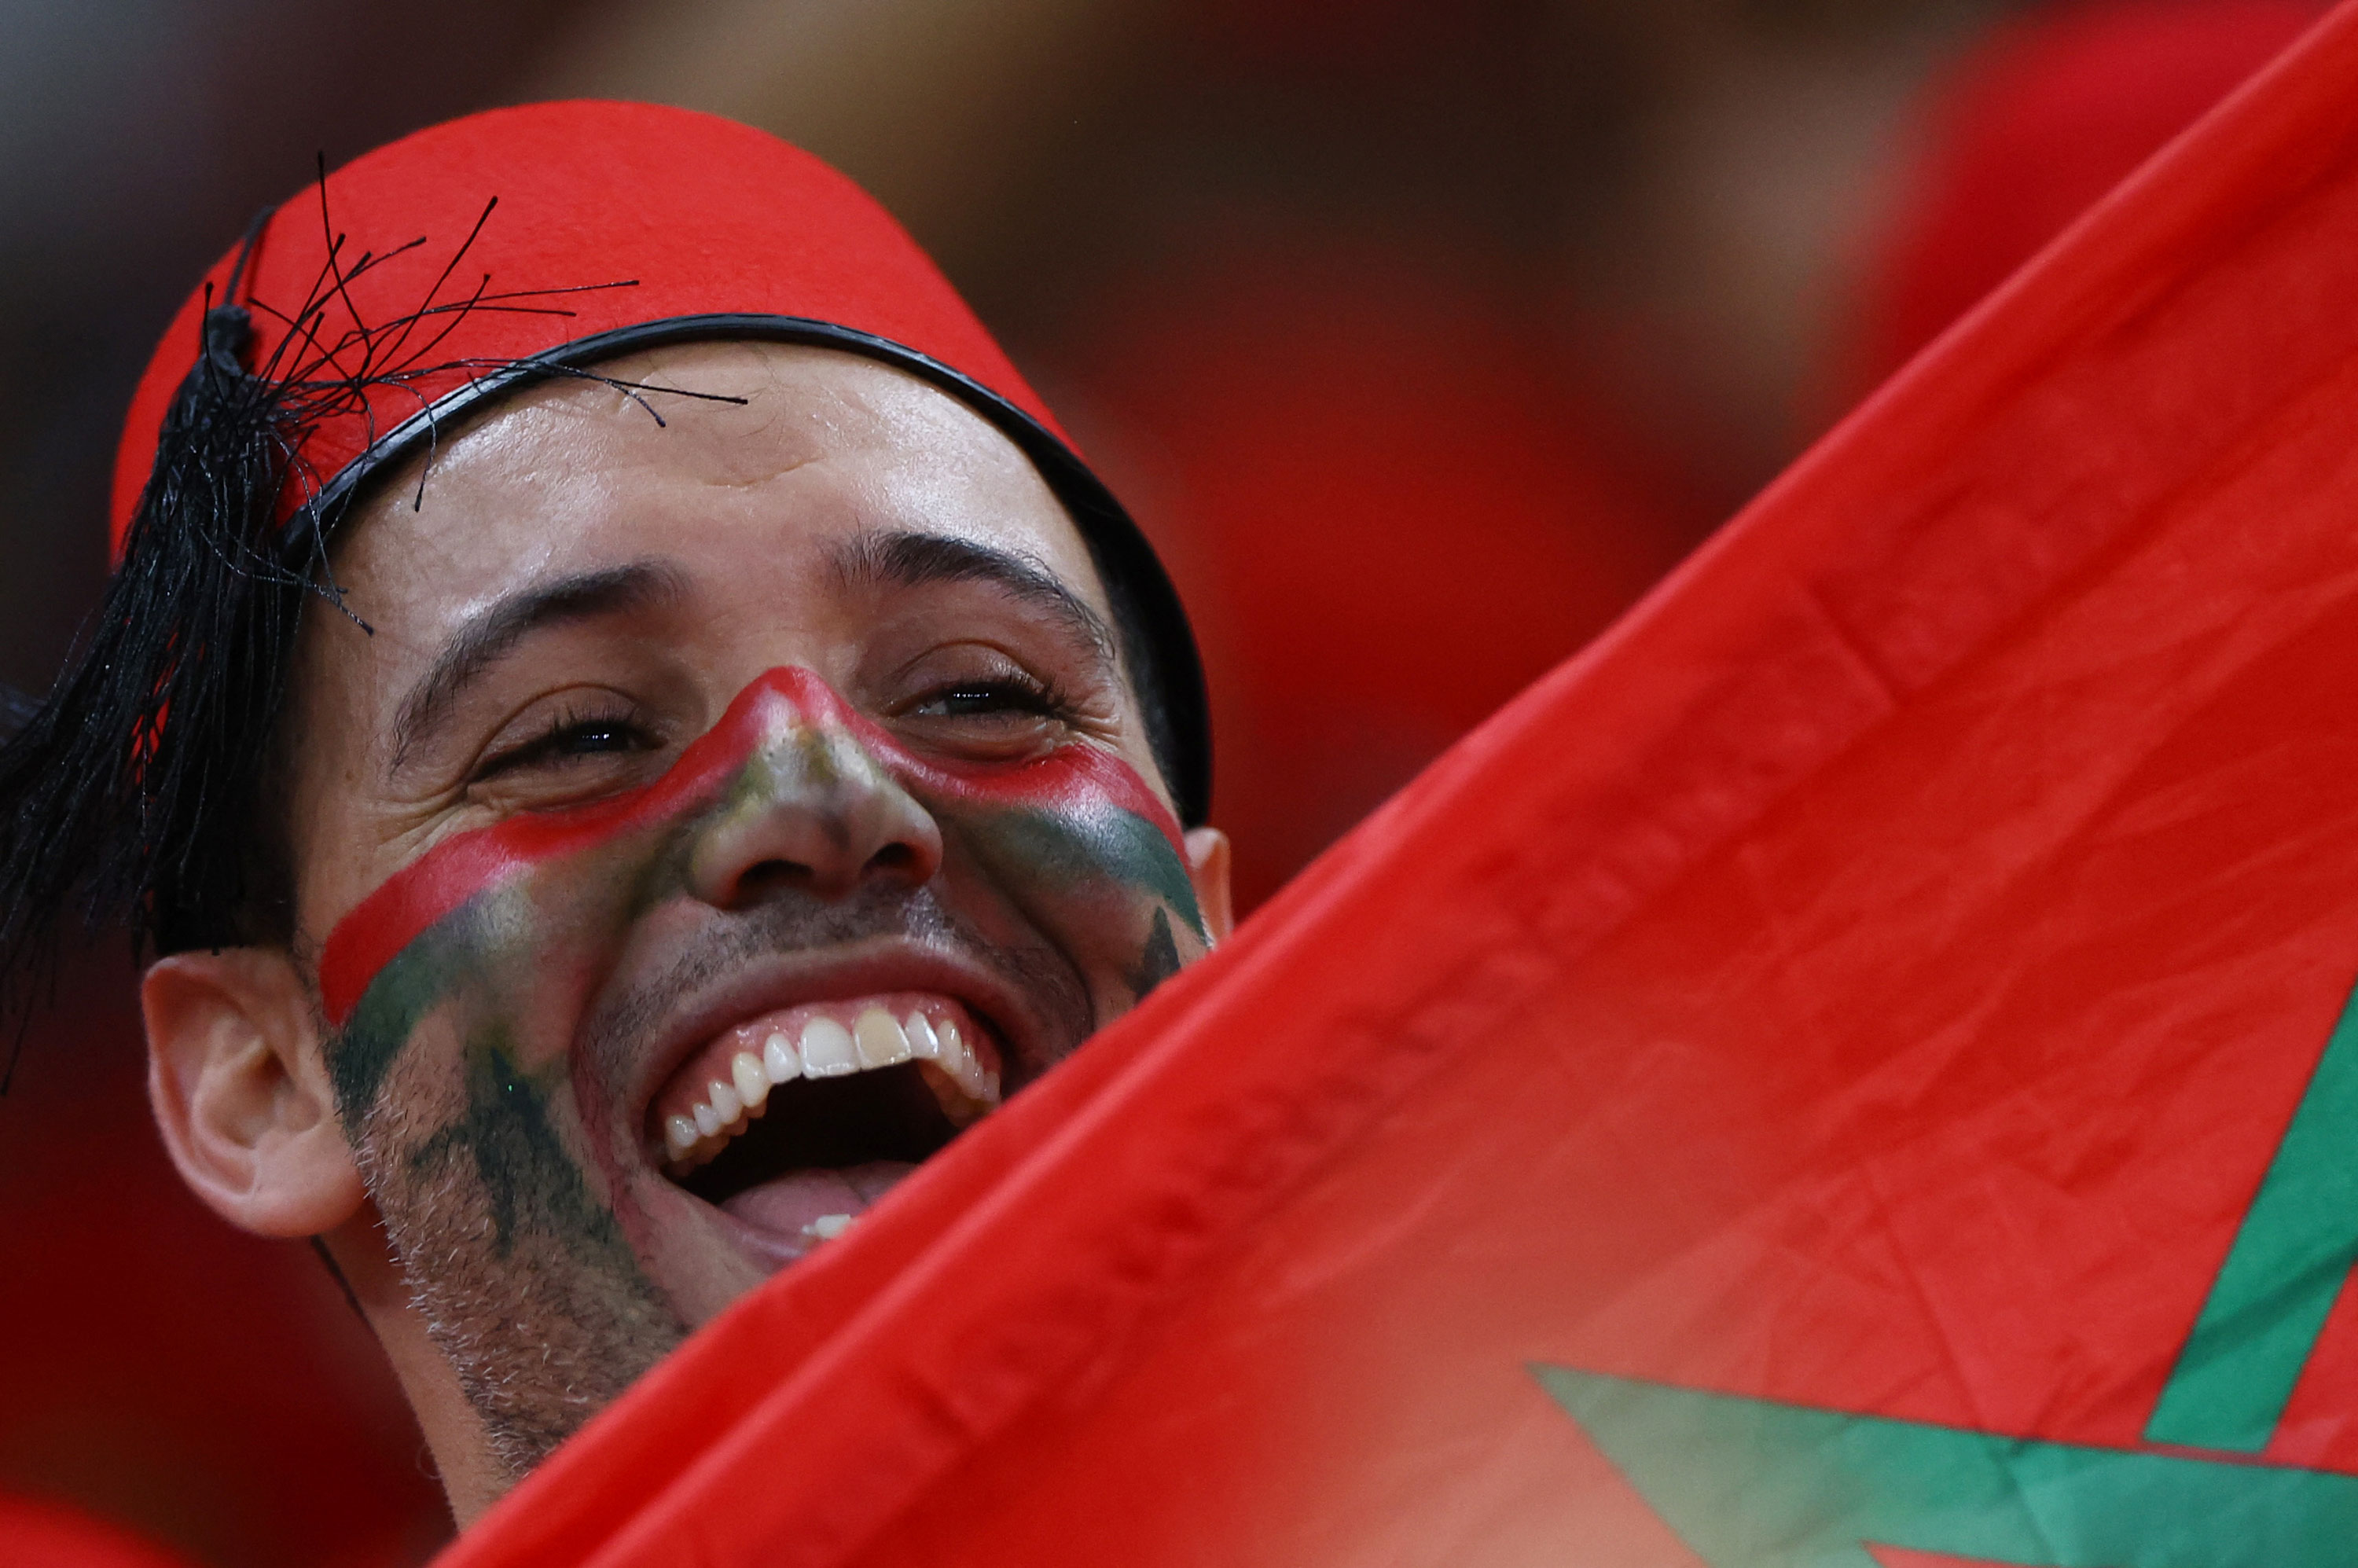 A Morocco fan cheers ahead of the match between Canada and Morocco on Thursday.